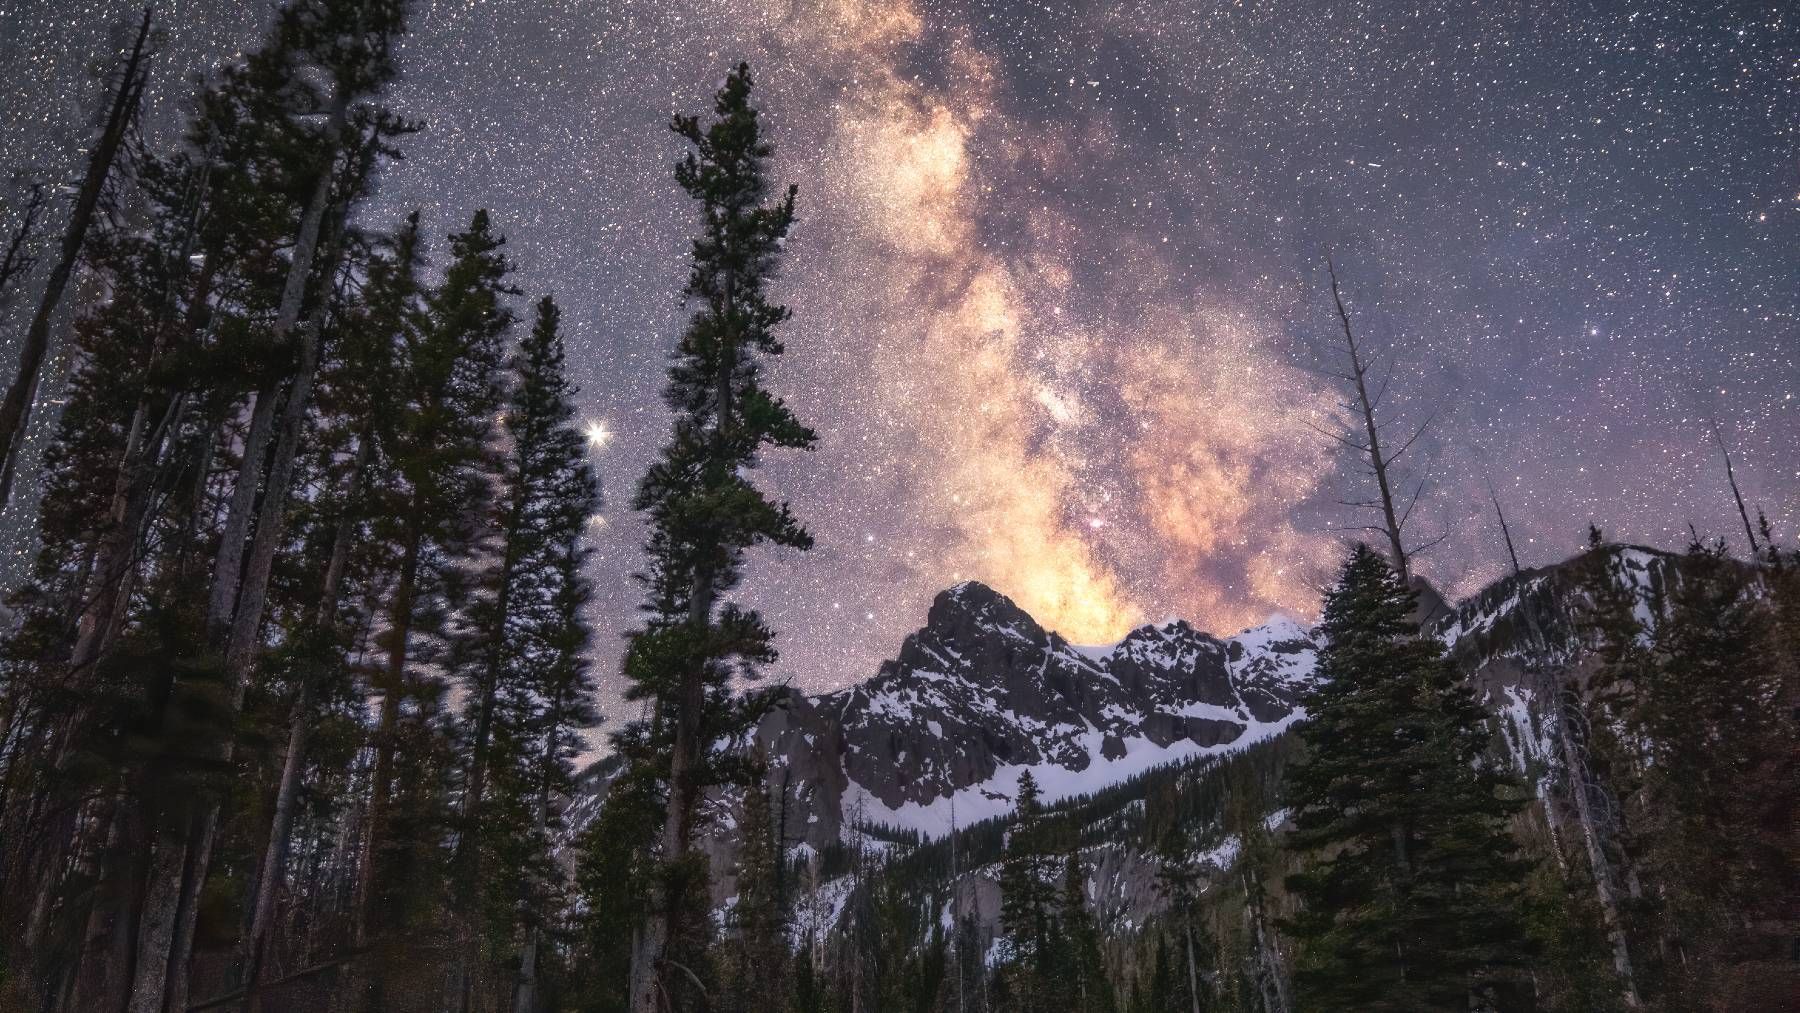 Image of Milky Way over mountains